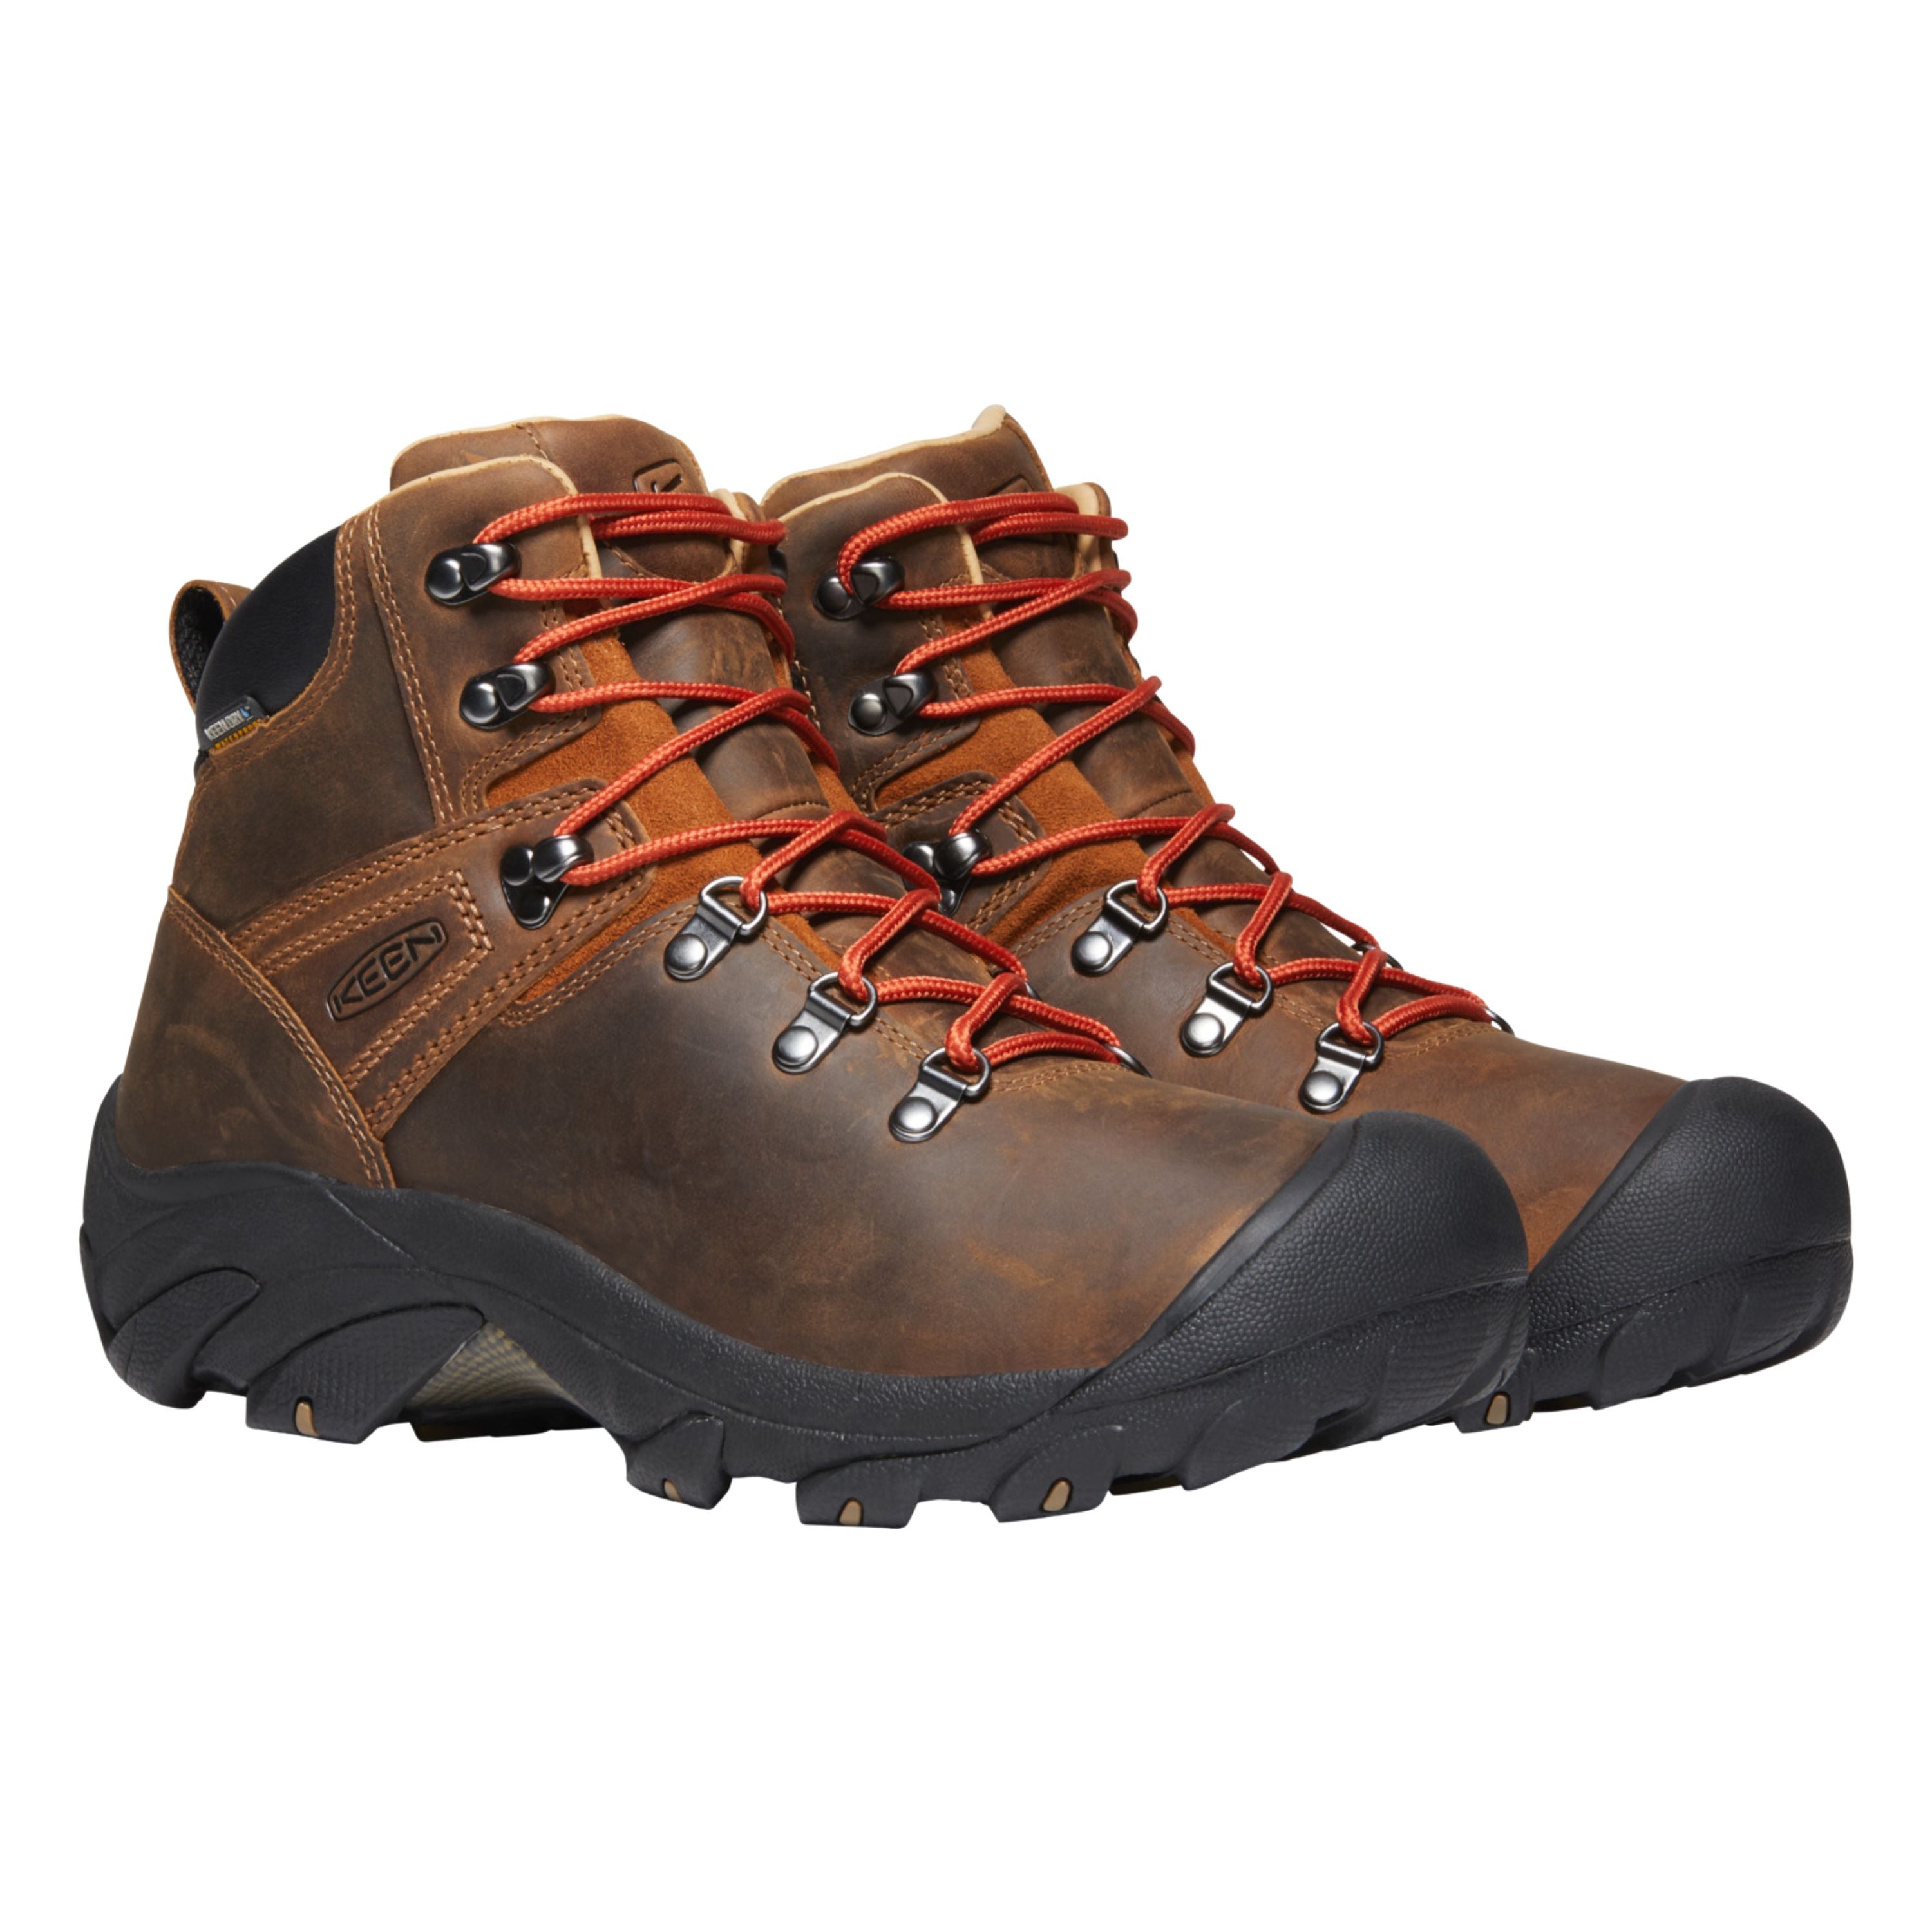 "Pyrenees" Hiking boots - Men's